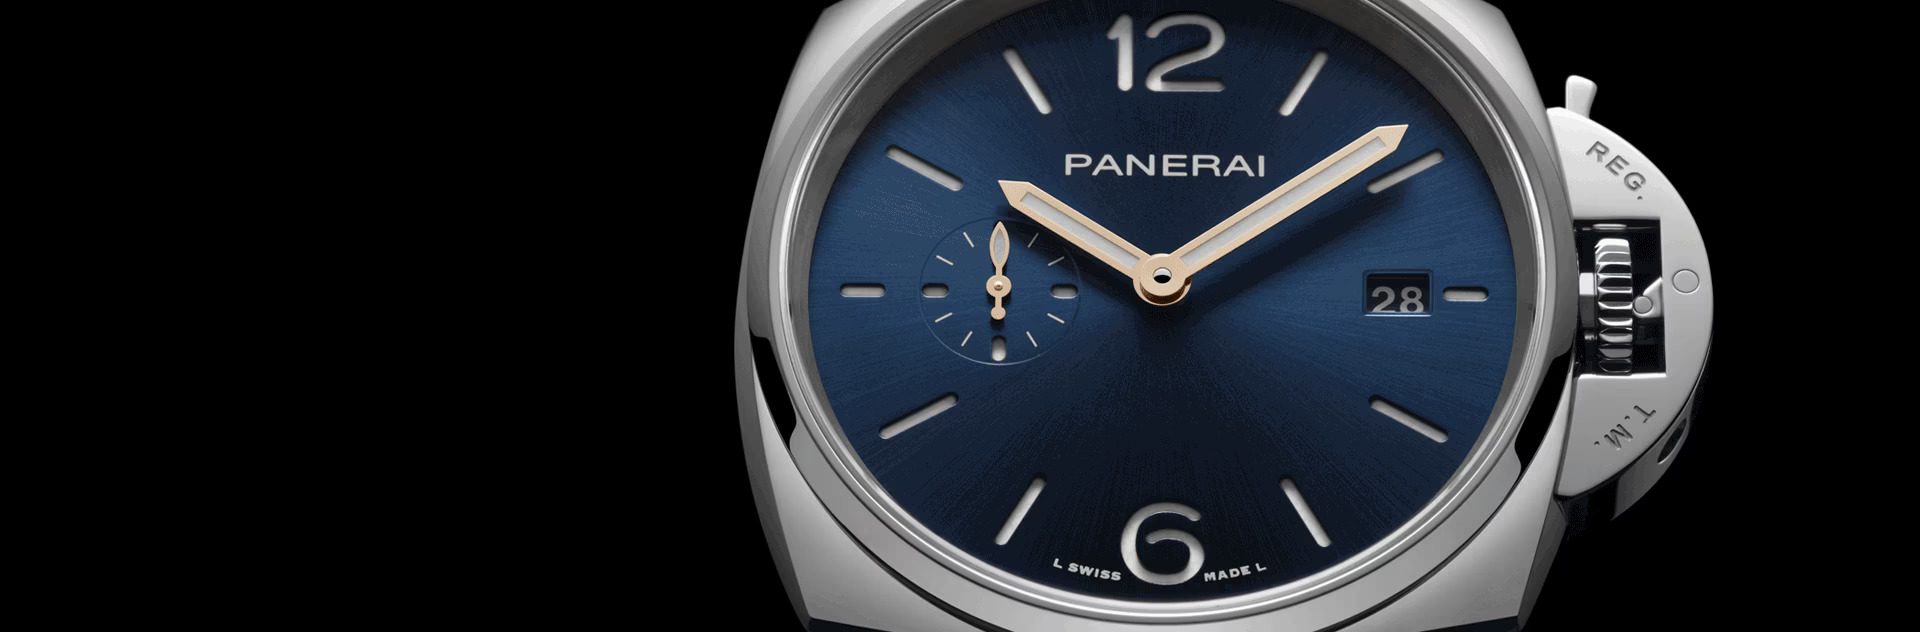 5 Key Features of Panerai Timepieces